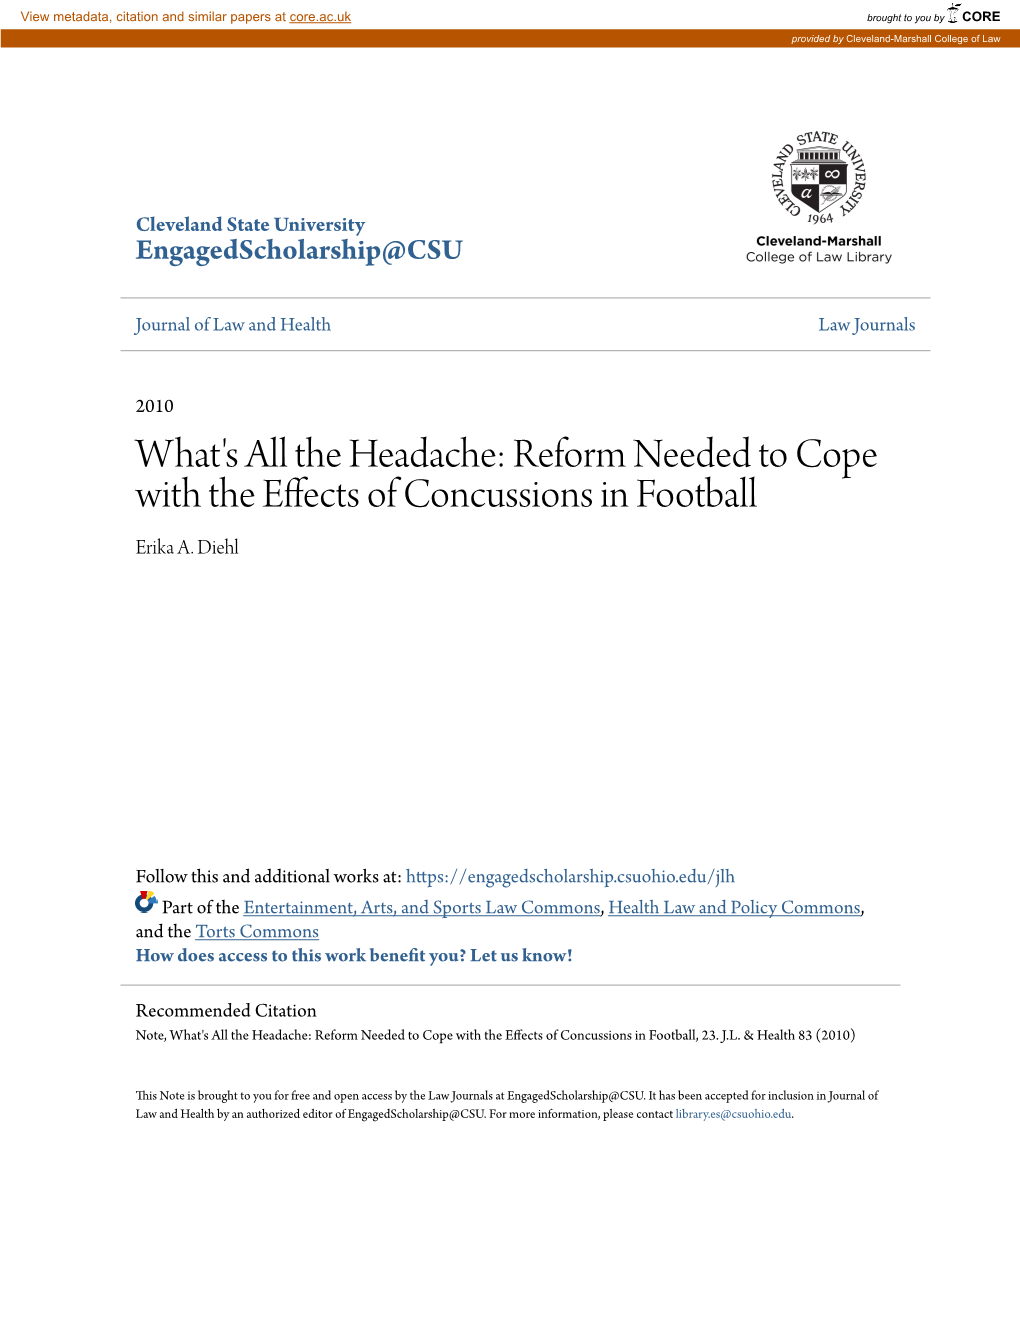 Reform Needed to Cope with the Effects of Concussions in Football Erika A